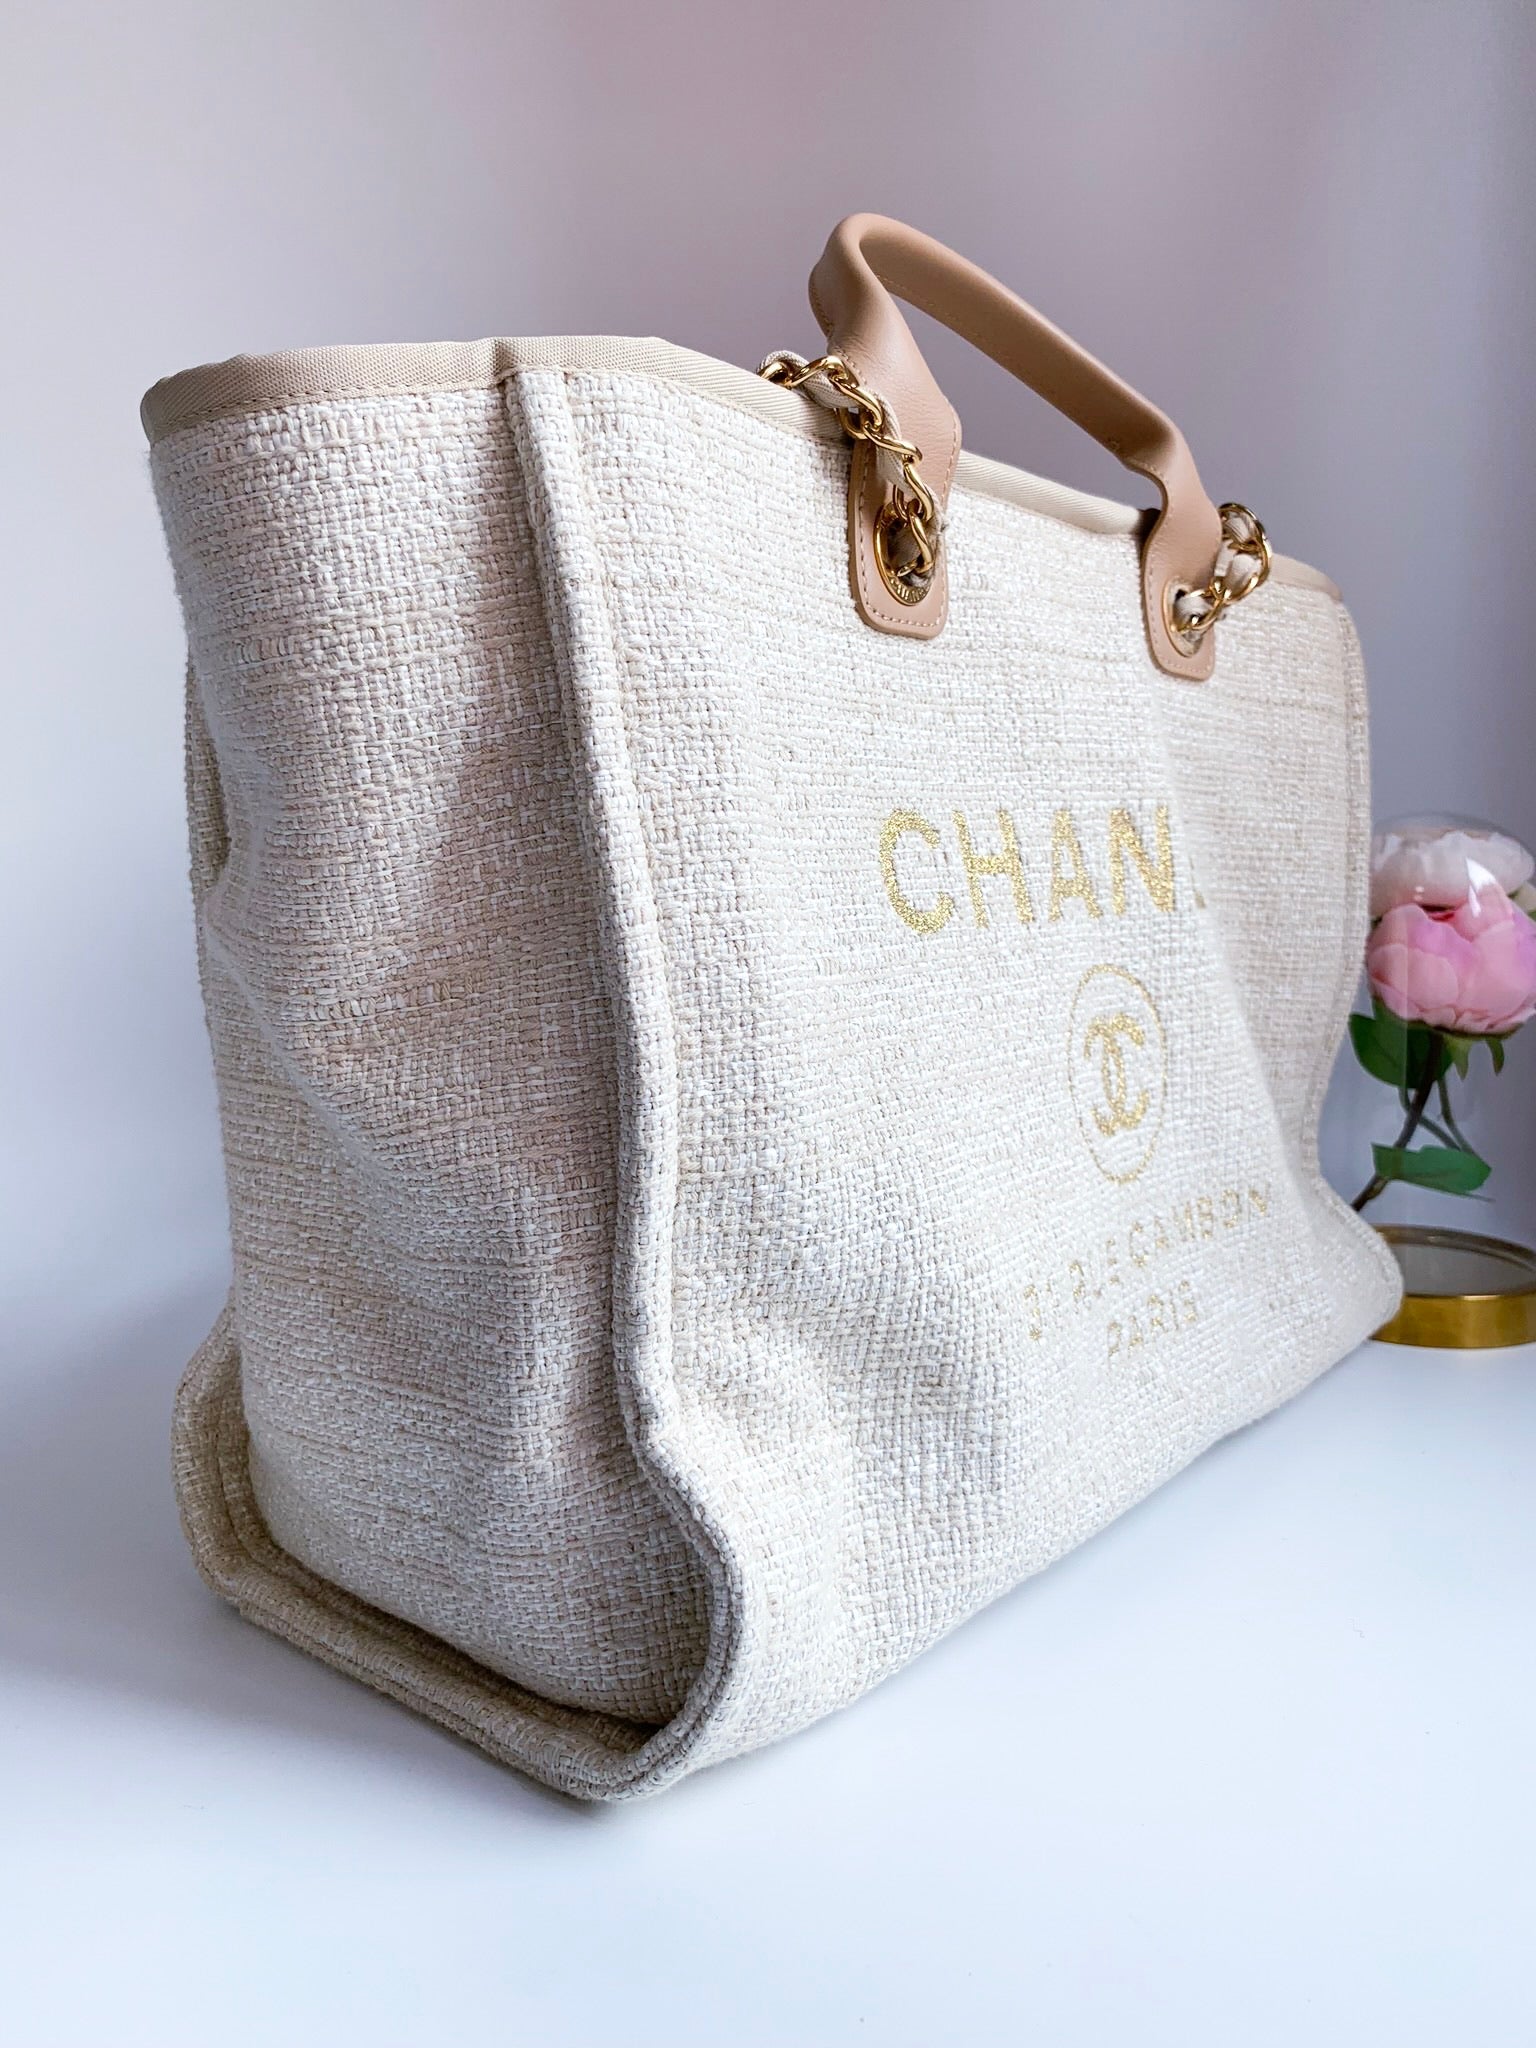 CHANEL Canvas Large Deauville Tote Ivory 328122